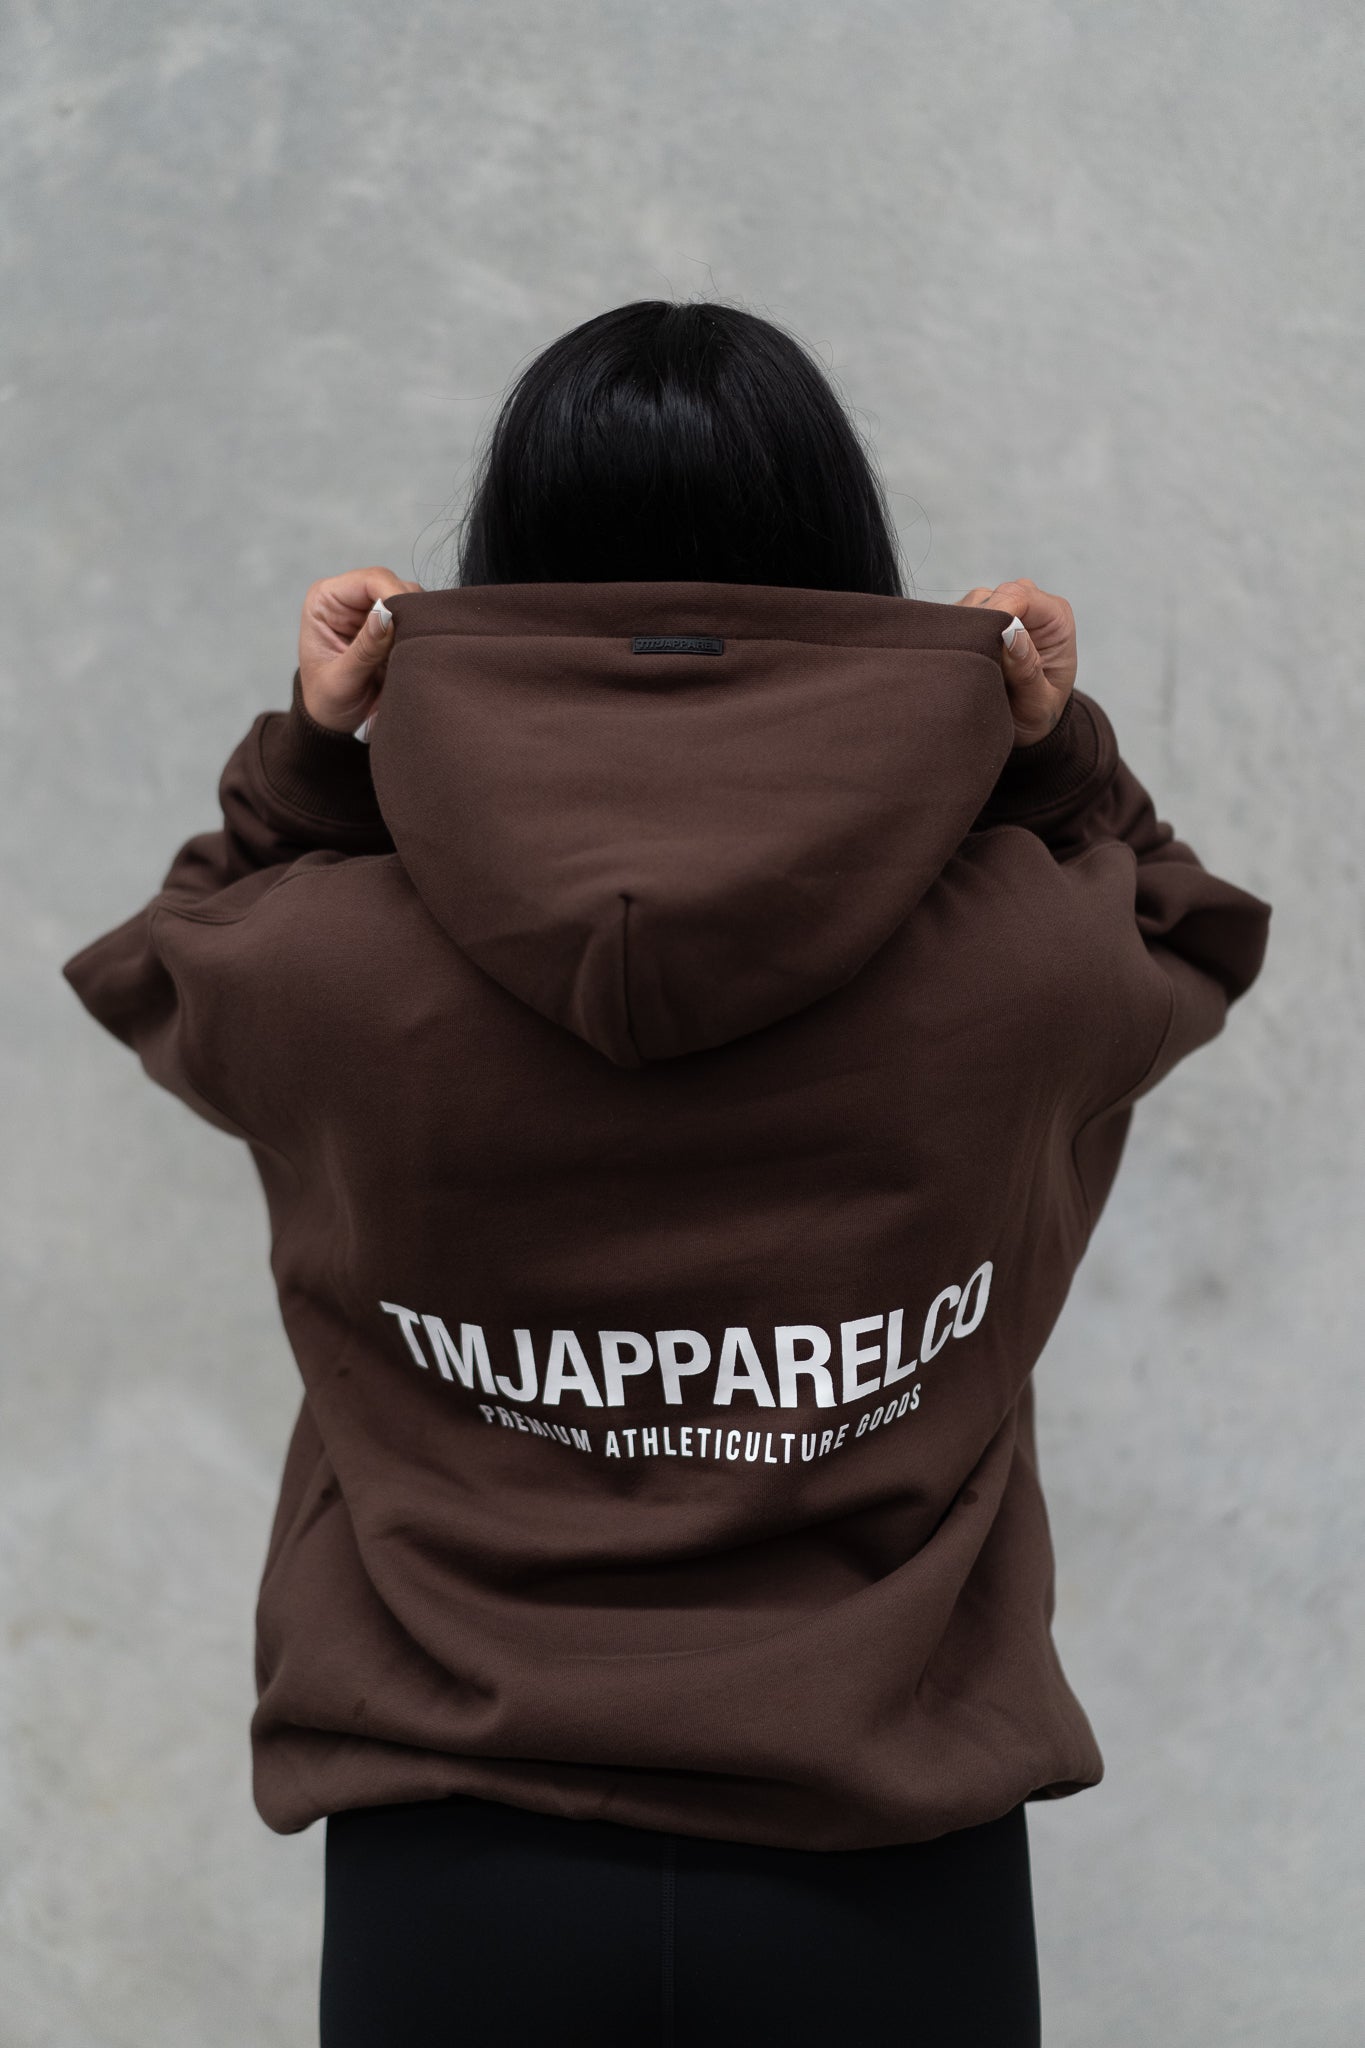 Female wearing TMJ Apparel Athleticulture Hoodie in Brown showing the back of the hoodie with white text saying TMJAPPARELCO Premium Athleticulture Goods in the middle centre of back.